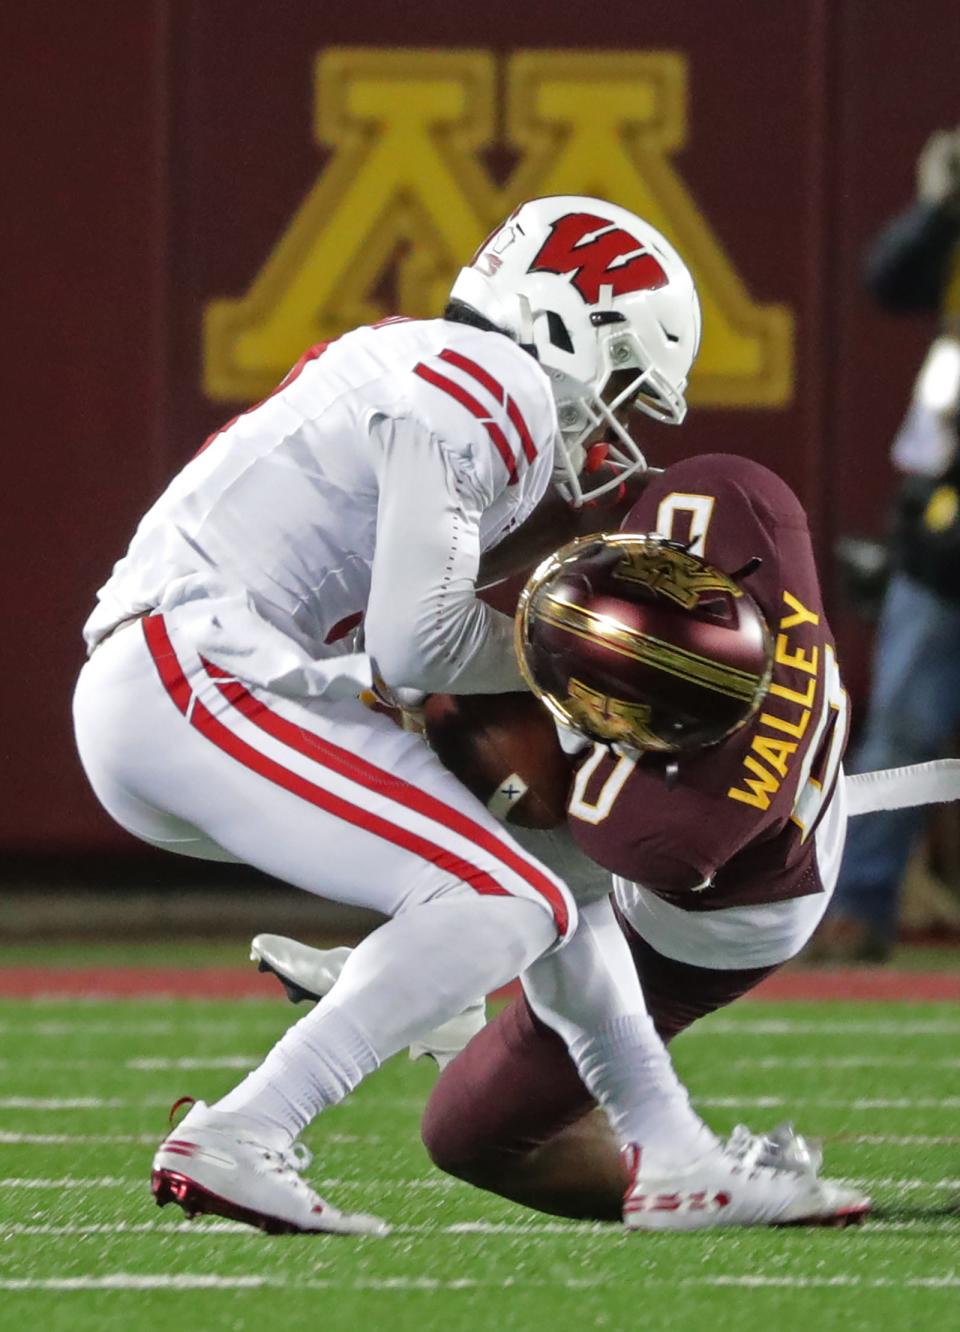 Minnesota defensive back Justin Walley comes up with a game-changing interception last year on  a pass intended for Wisconsin wide receiver Kendric Pryor.